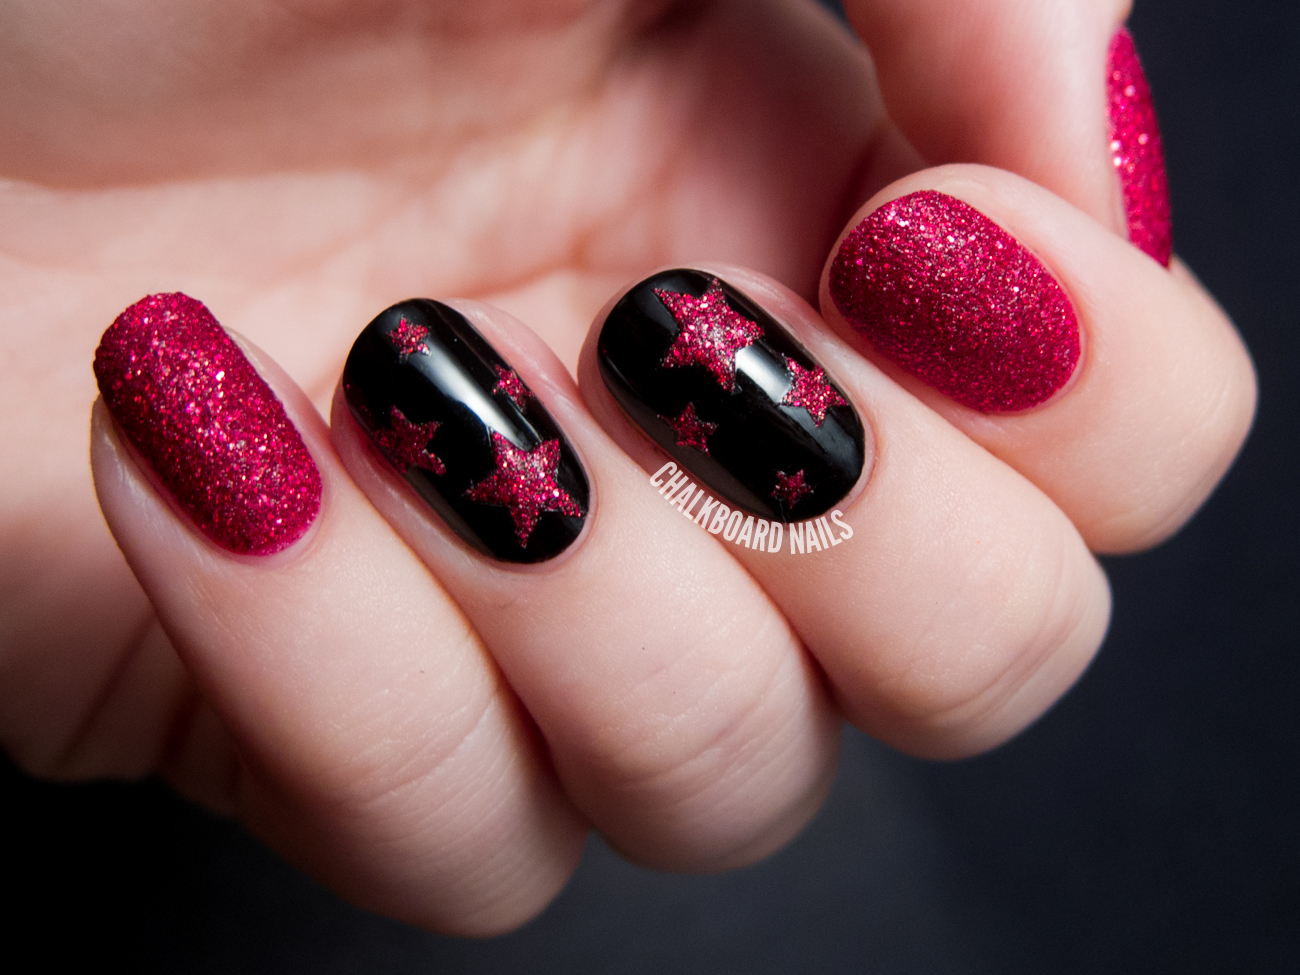 Textured ruby stars by @chalkboardnails